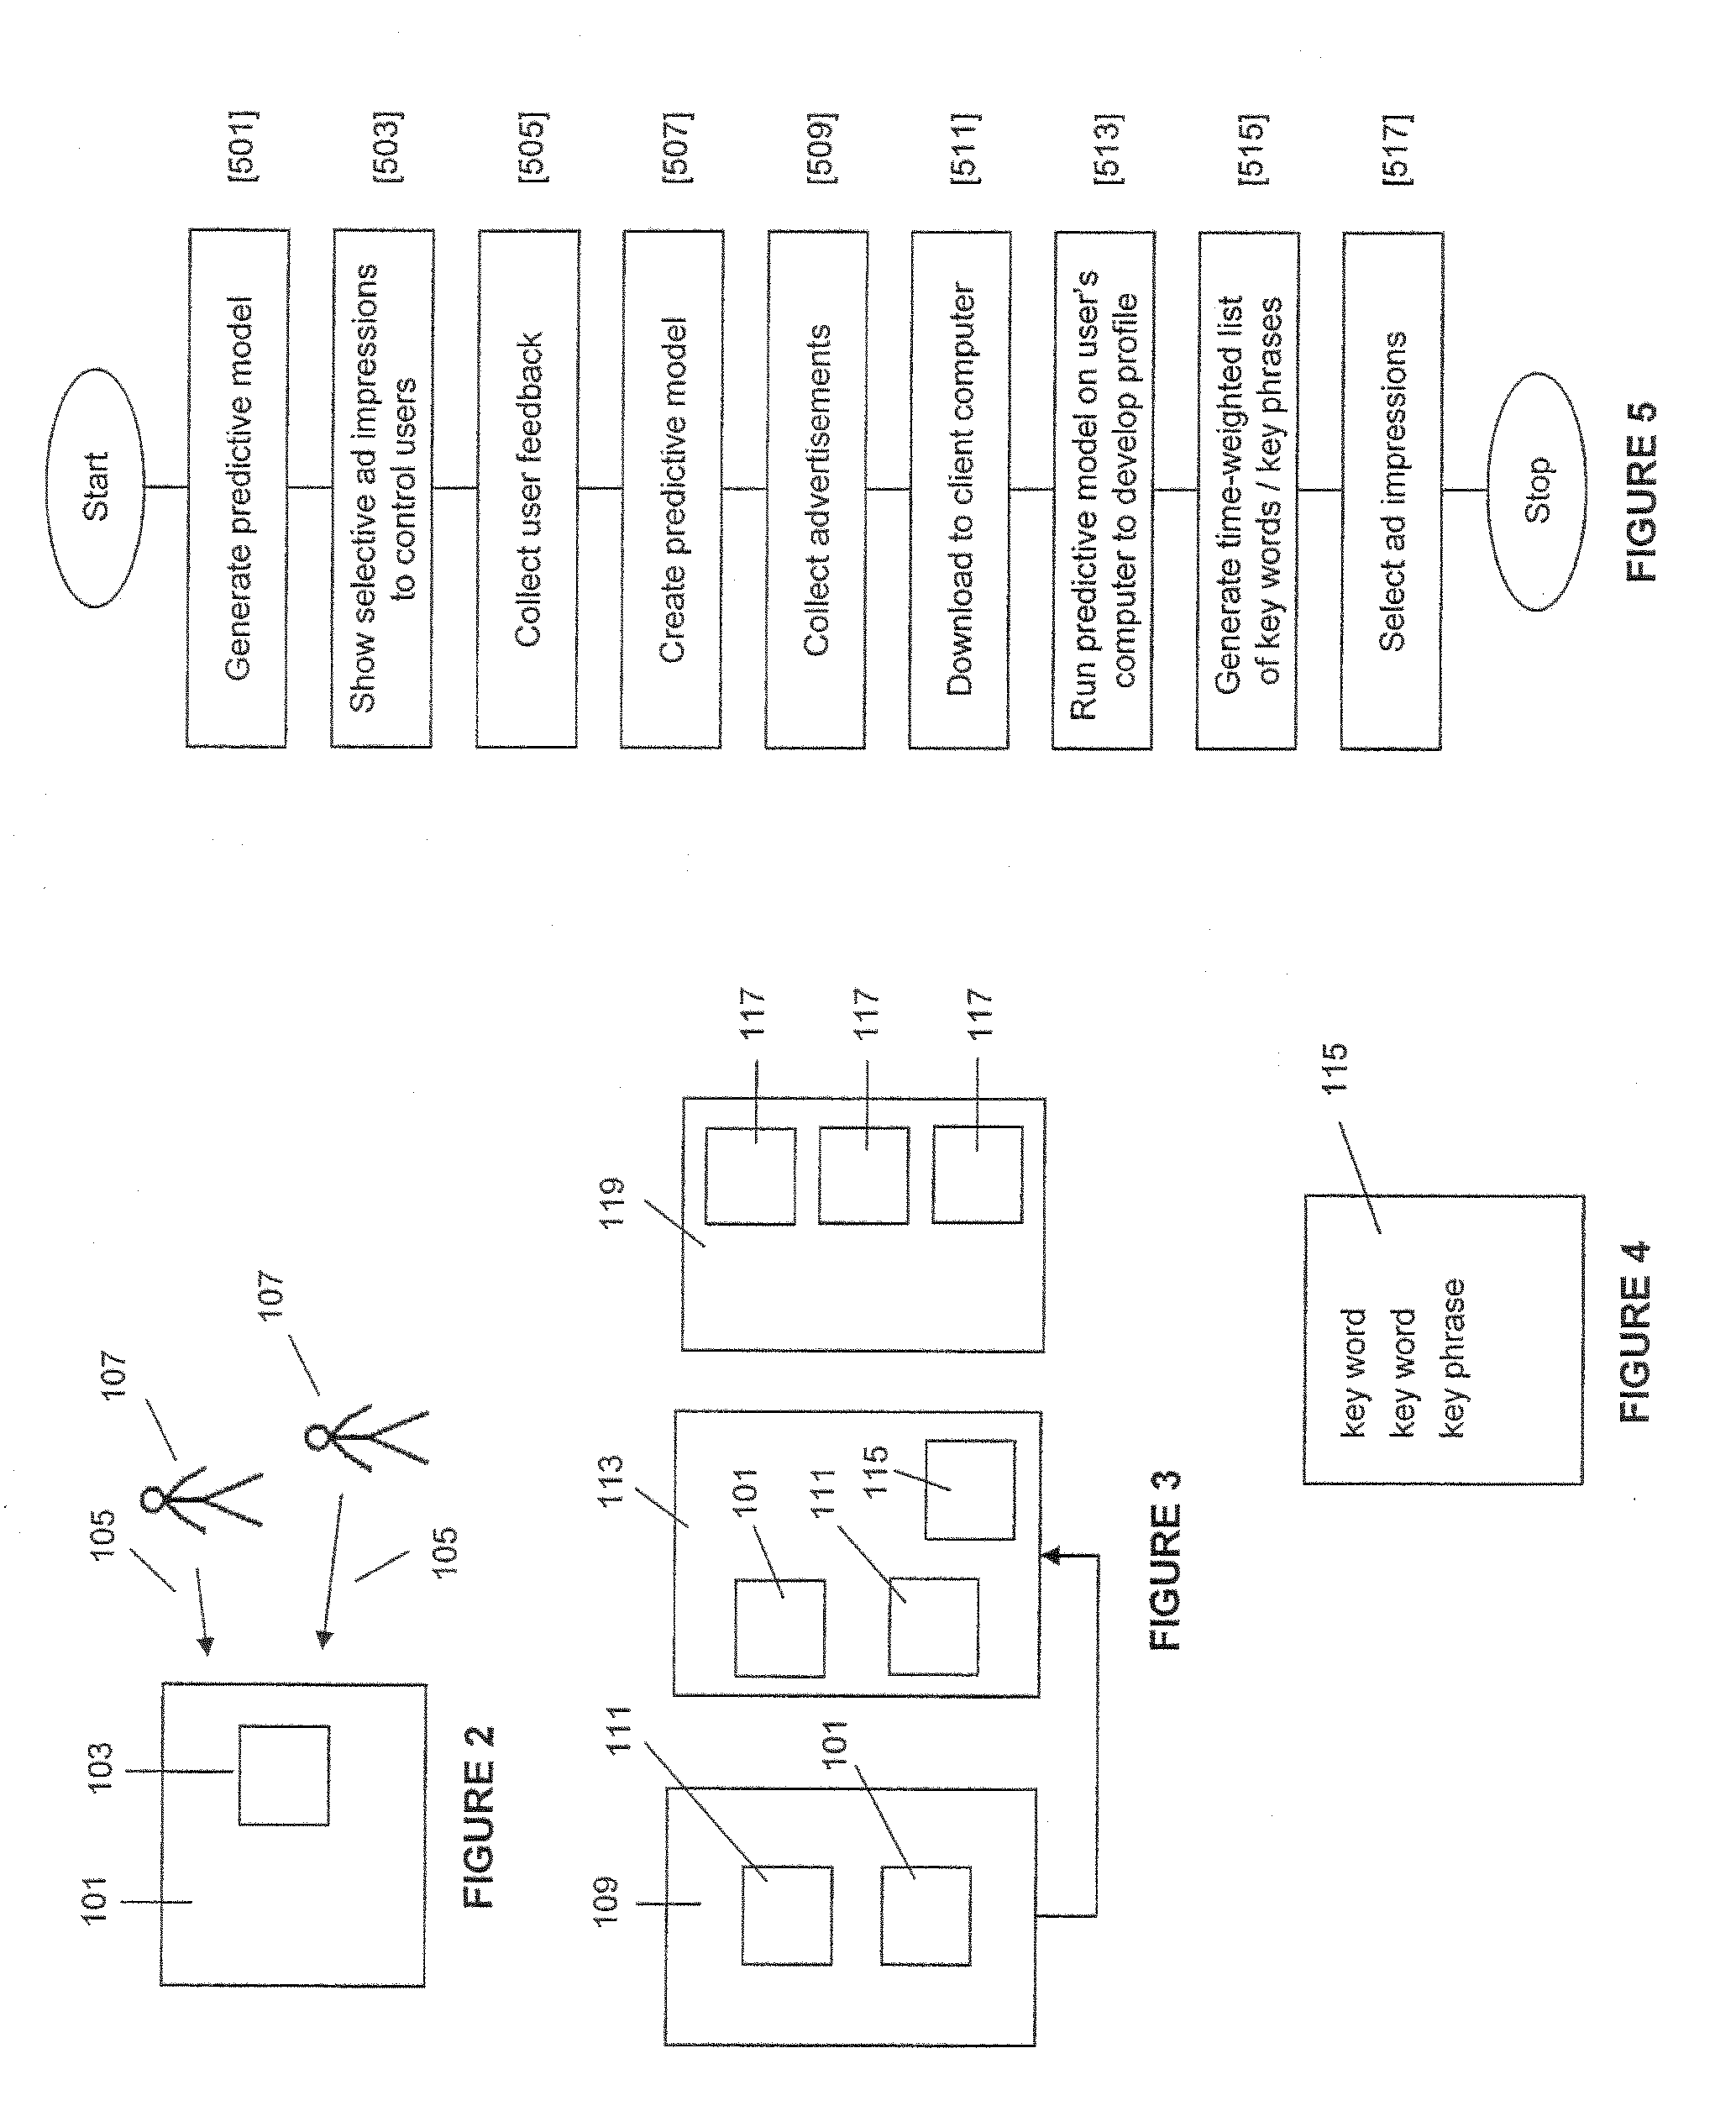 Method and System for Targeted Advertising